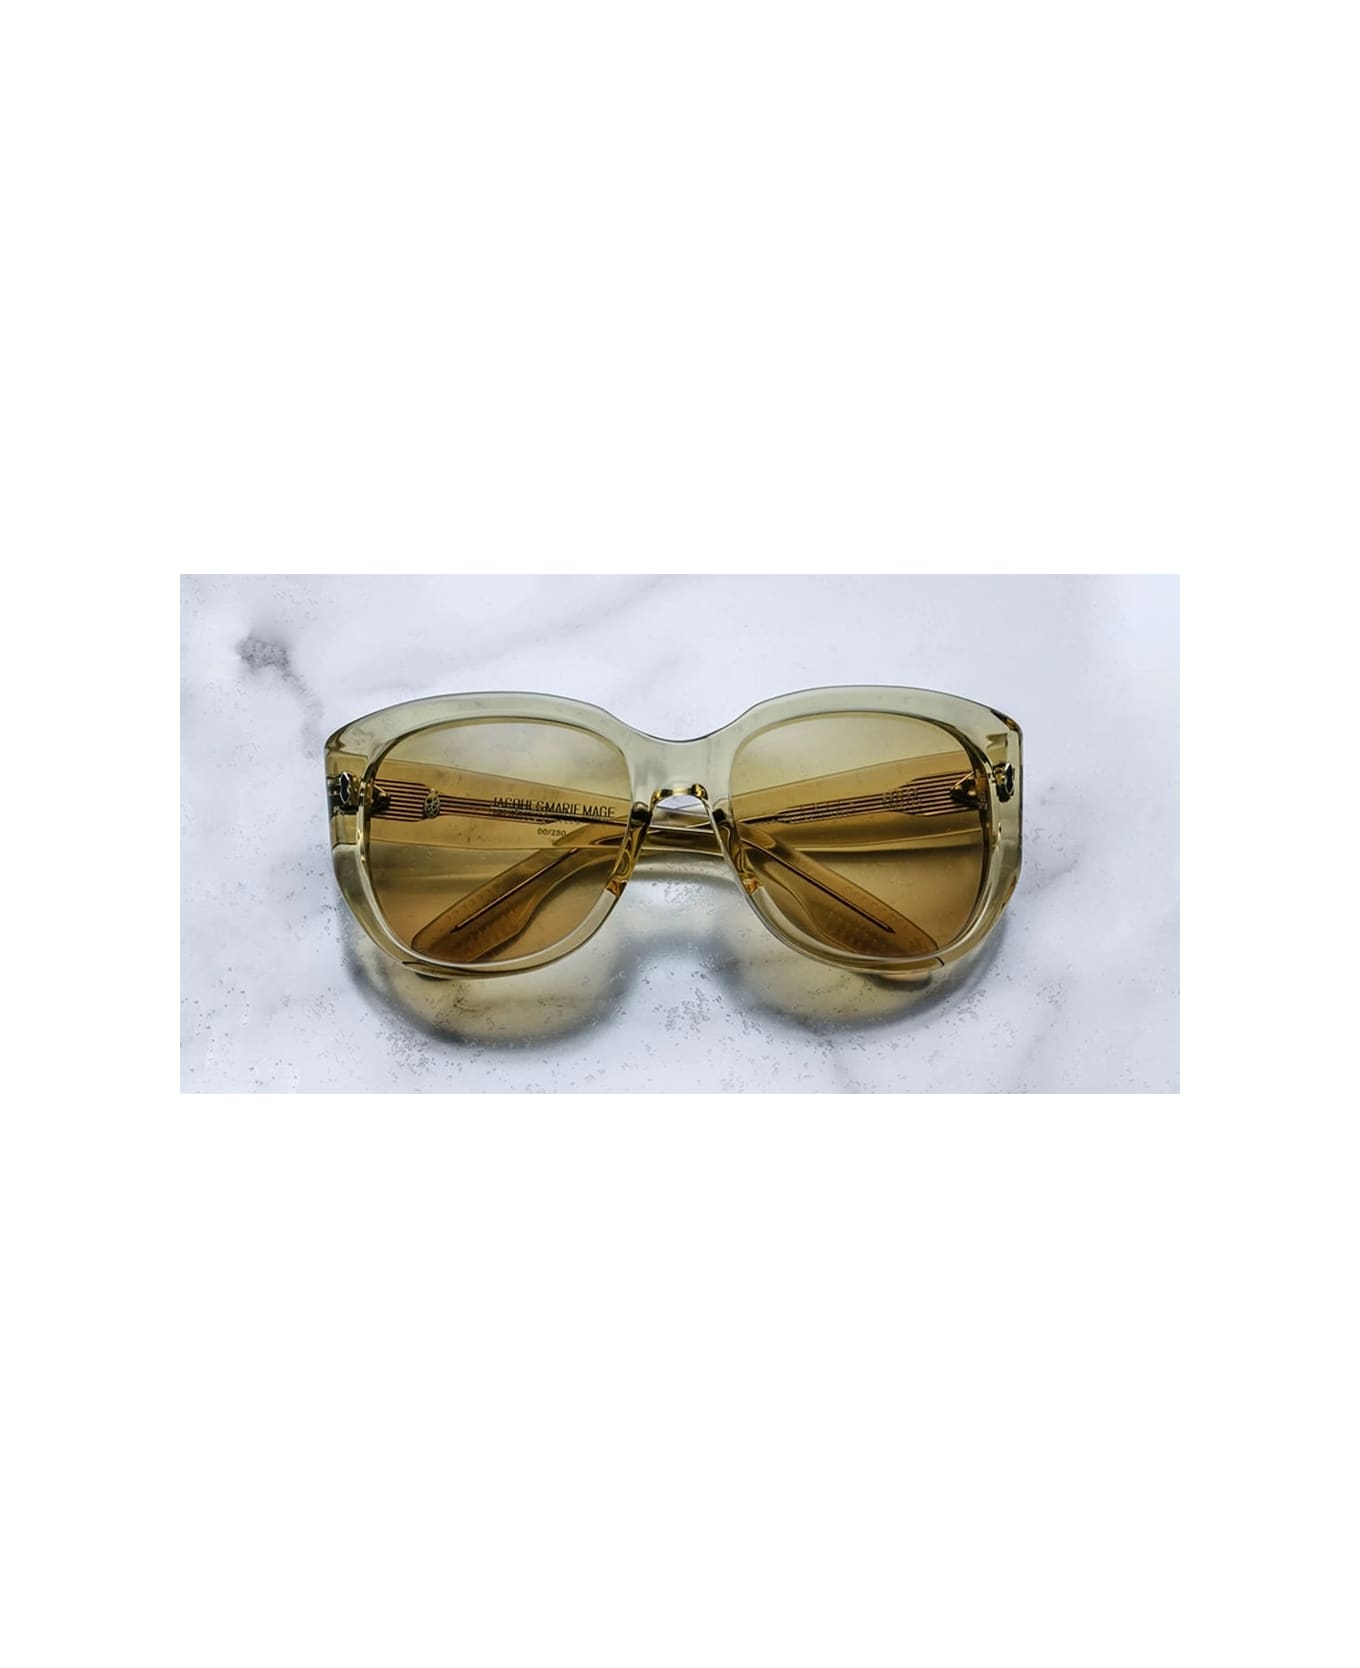 Jacques Marie Mage Roxy - Olive Sunglasses - green